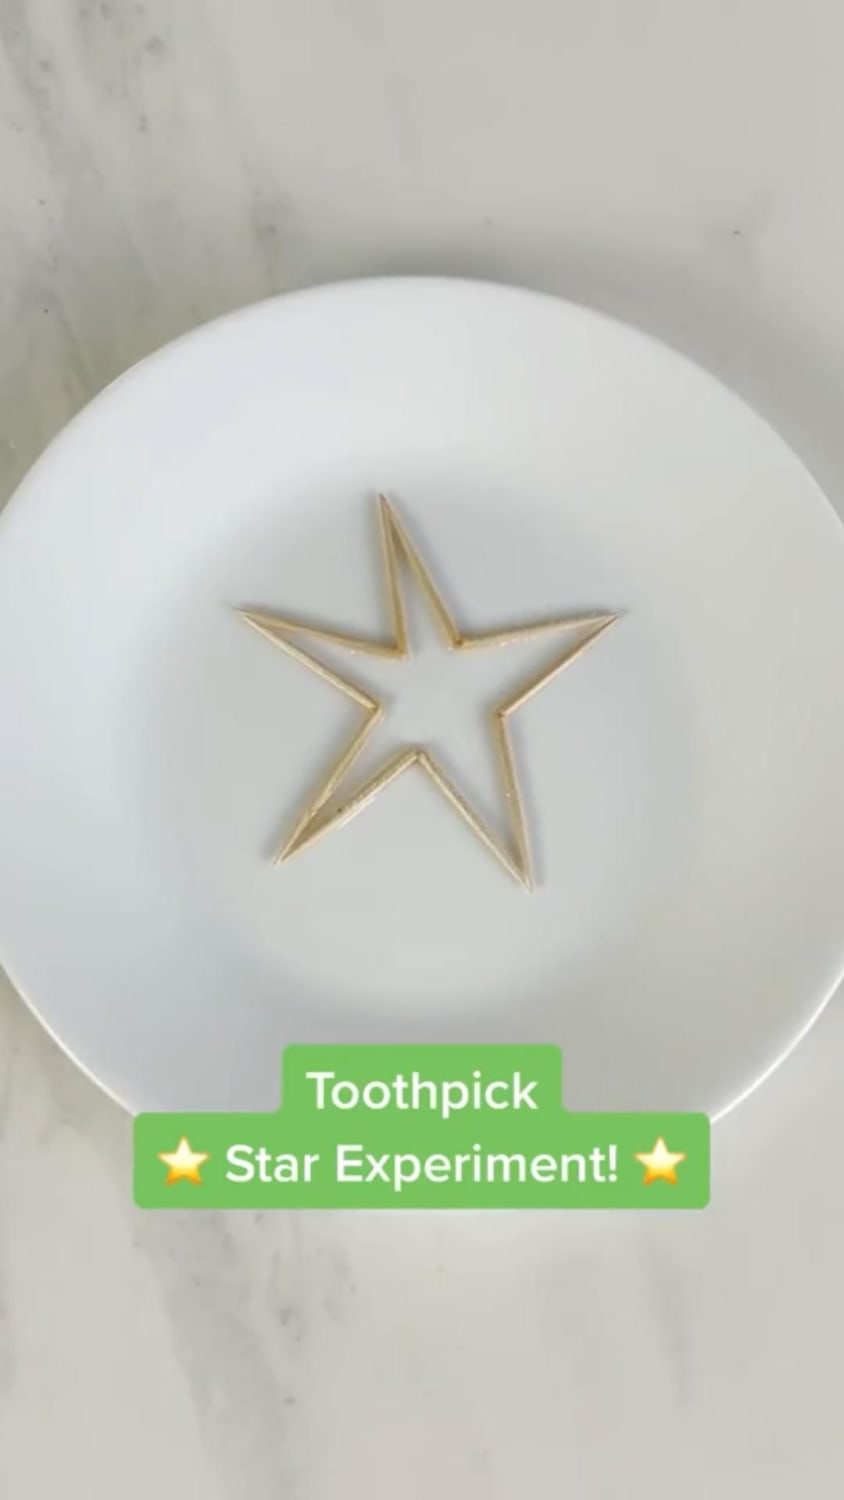 Toothpick star experiment. Easy and budget-friendly science experiment for kids!